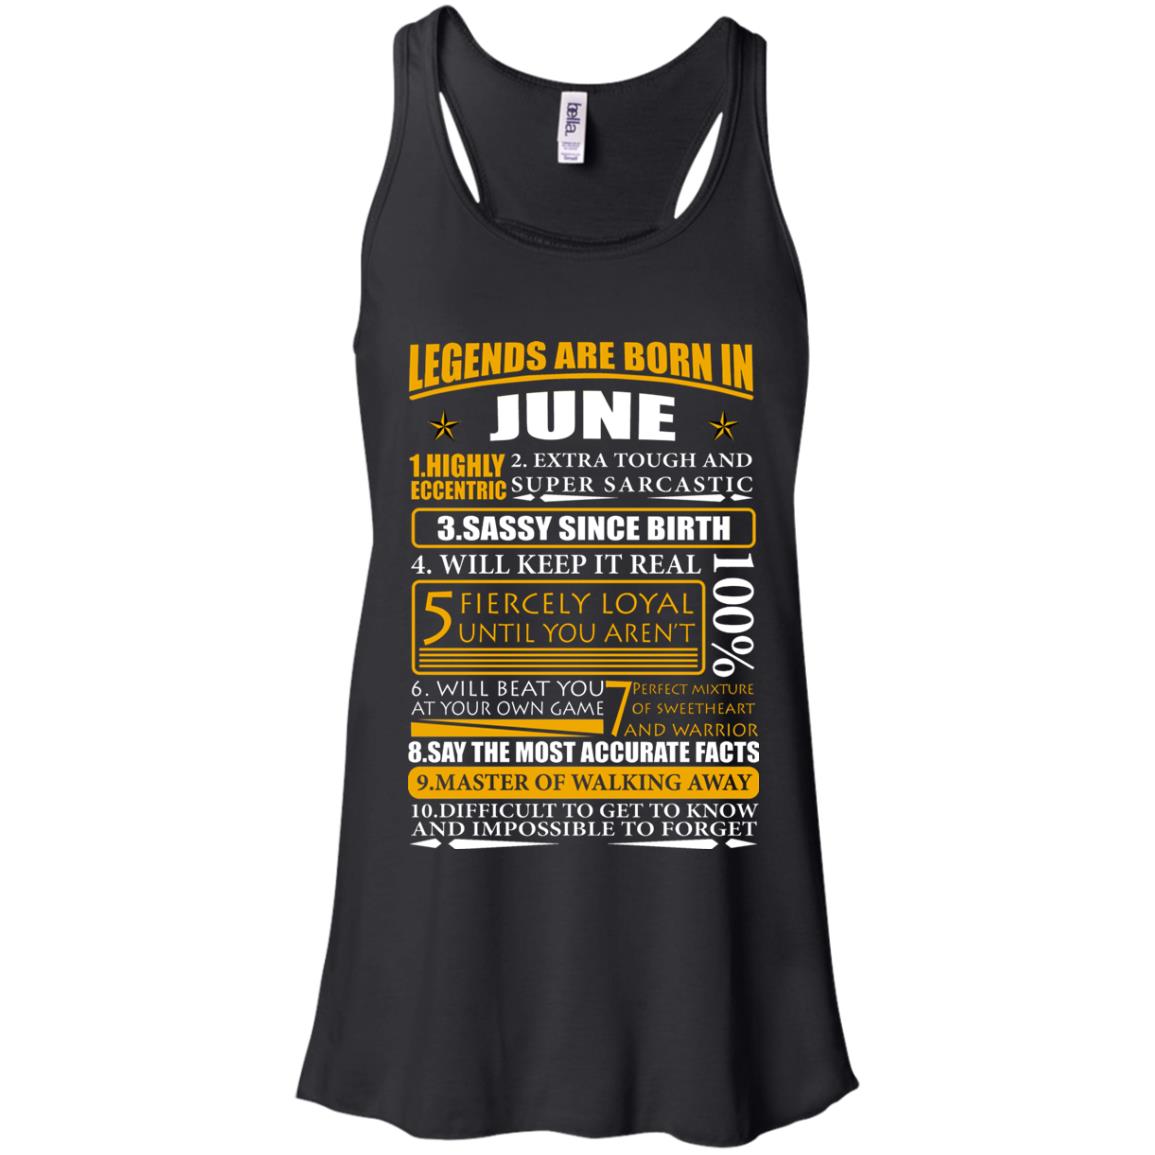 Legends Are Born In June - Highly Eccentric Shirt | AllBlueTees